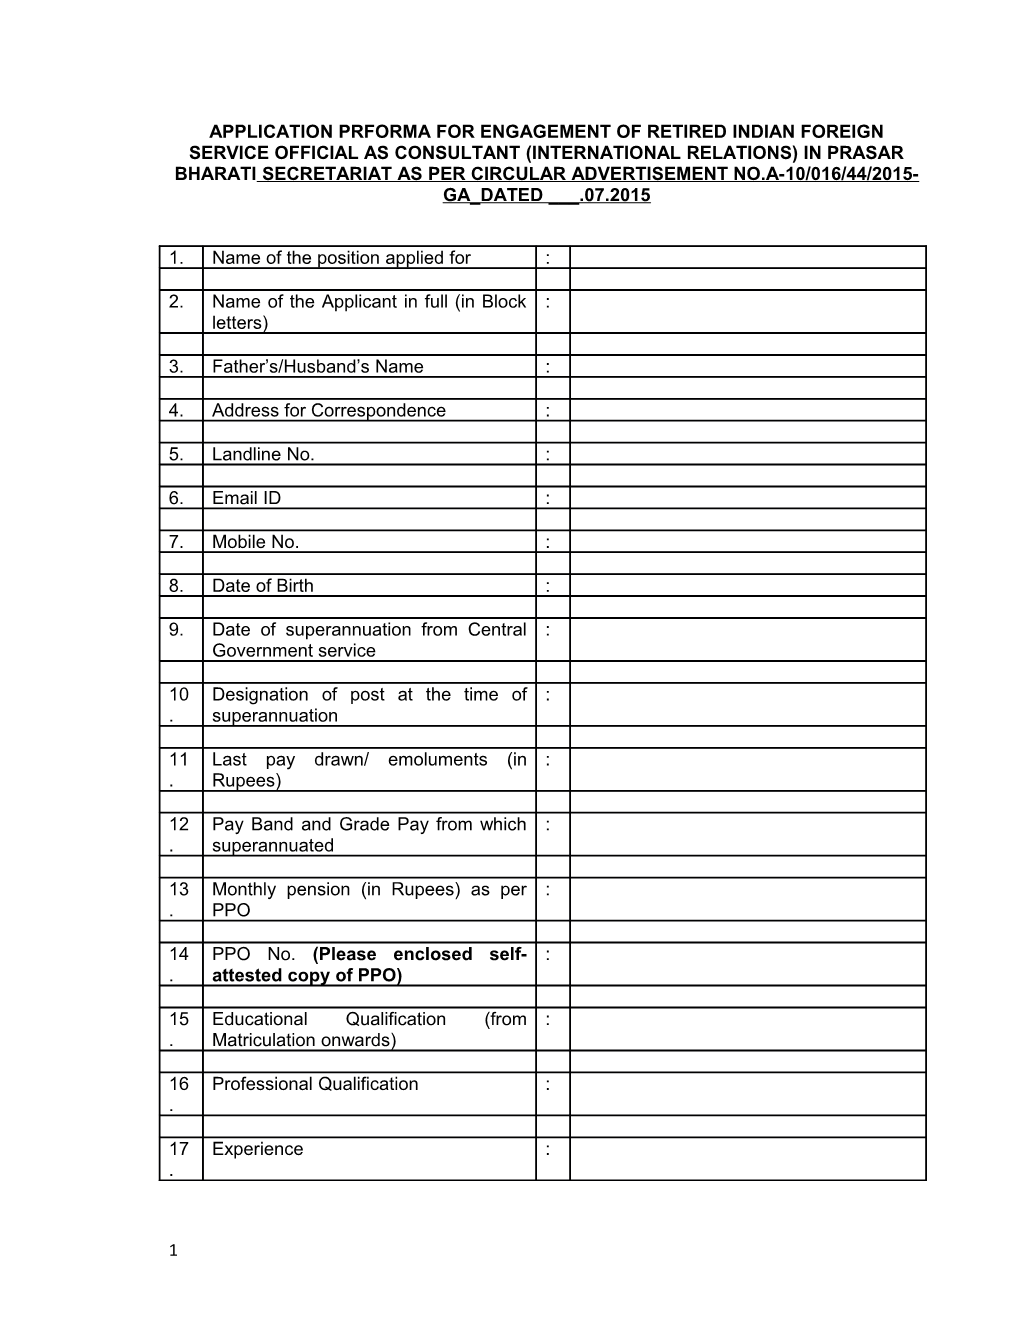 Application Prforma for Engagement of Retired Indian Foreign Service Official As Consultant